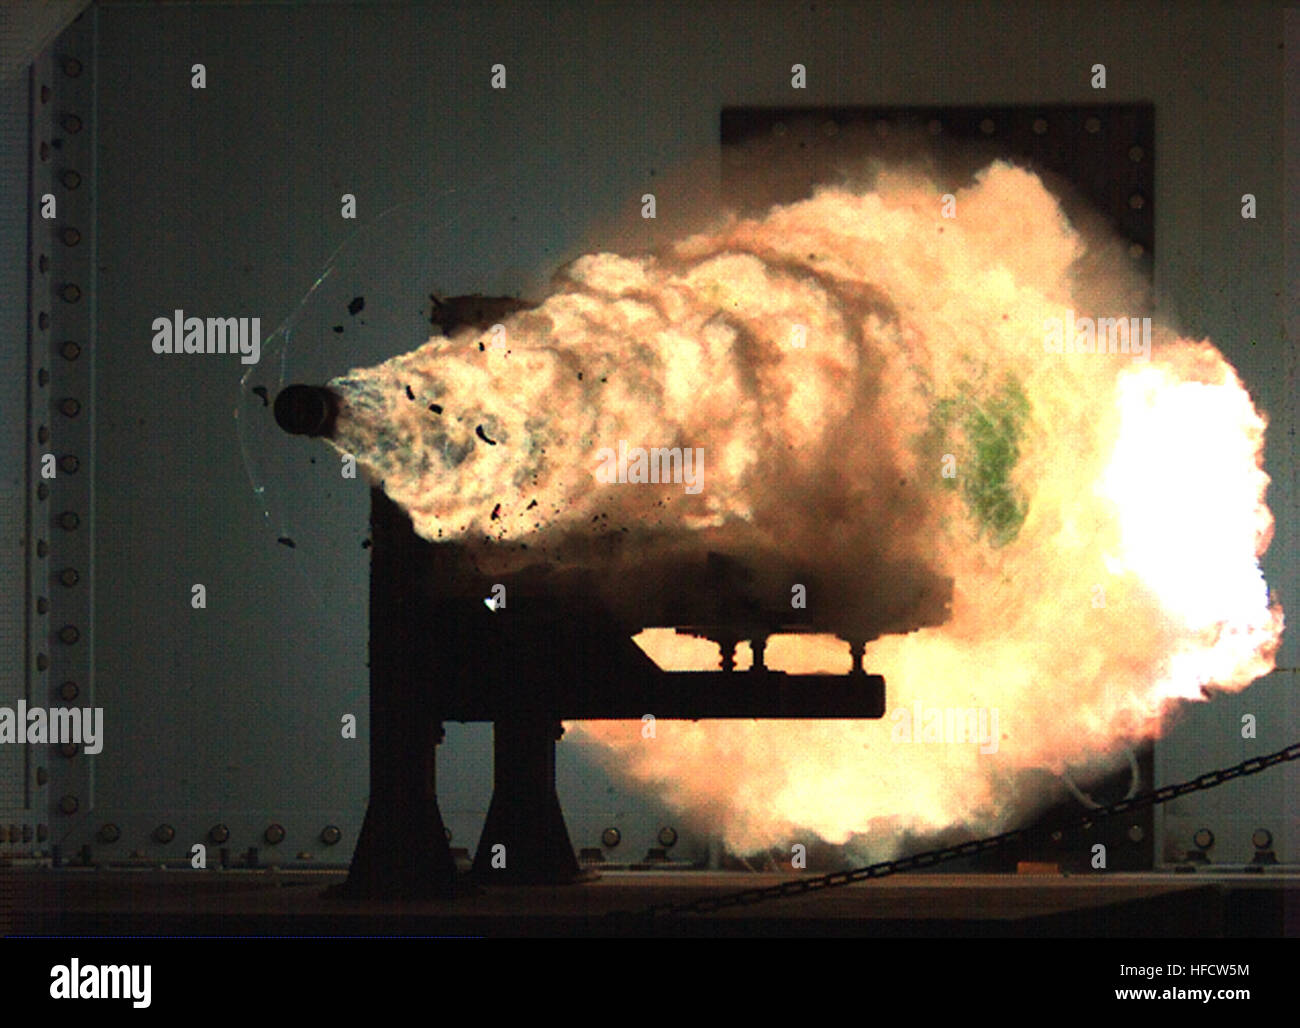 080131-N-0000X-001   DAHLGREN, Va. (Jan. 31, 2008) Photograph taken from a high-speed video camera during a record-setting firing of an electromagnetic railgun (EMRG) at Naval Surface Warfare Center, Dahlgren, Va., on January 31, 2008, firing at 10.64MJ (megajoules) with a muzzle velocity of 2520 meters per second. The Office of Naval ResearchÕs EMRG program is part of the Department of the NavyÕs Science and Technology investments, focused on developing new technologies to support Navy and Marine Corps war fighting needs. This photograph is a frame taken from a high-speed video camera. U.S. N Stock Photo